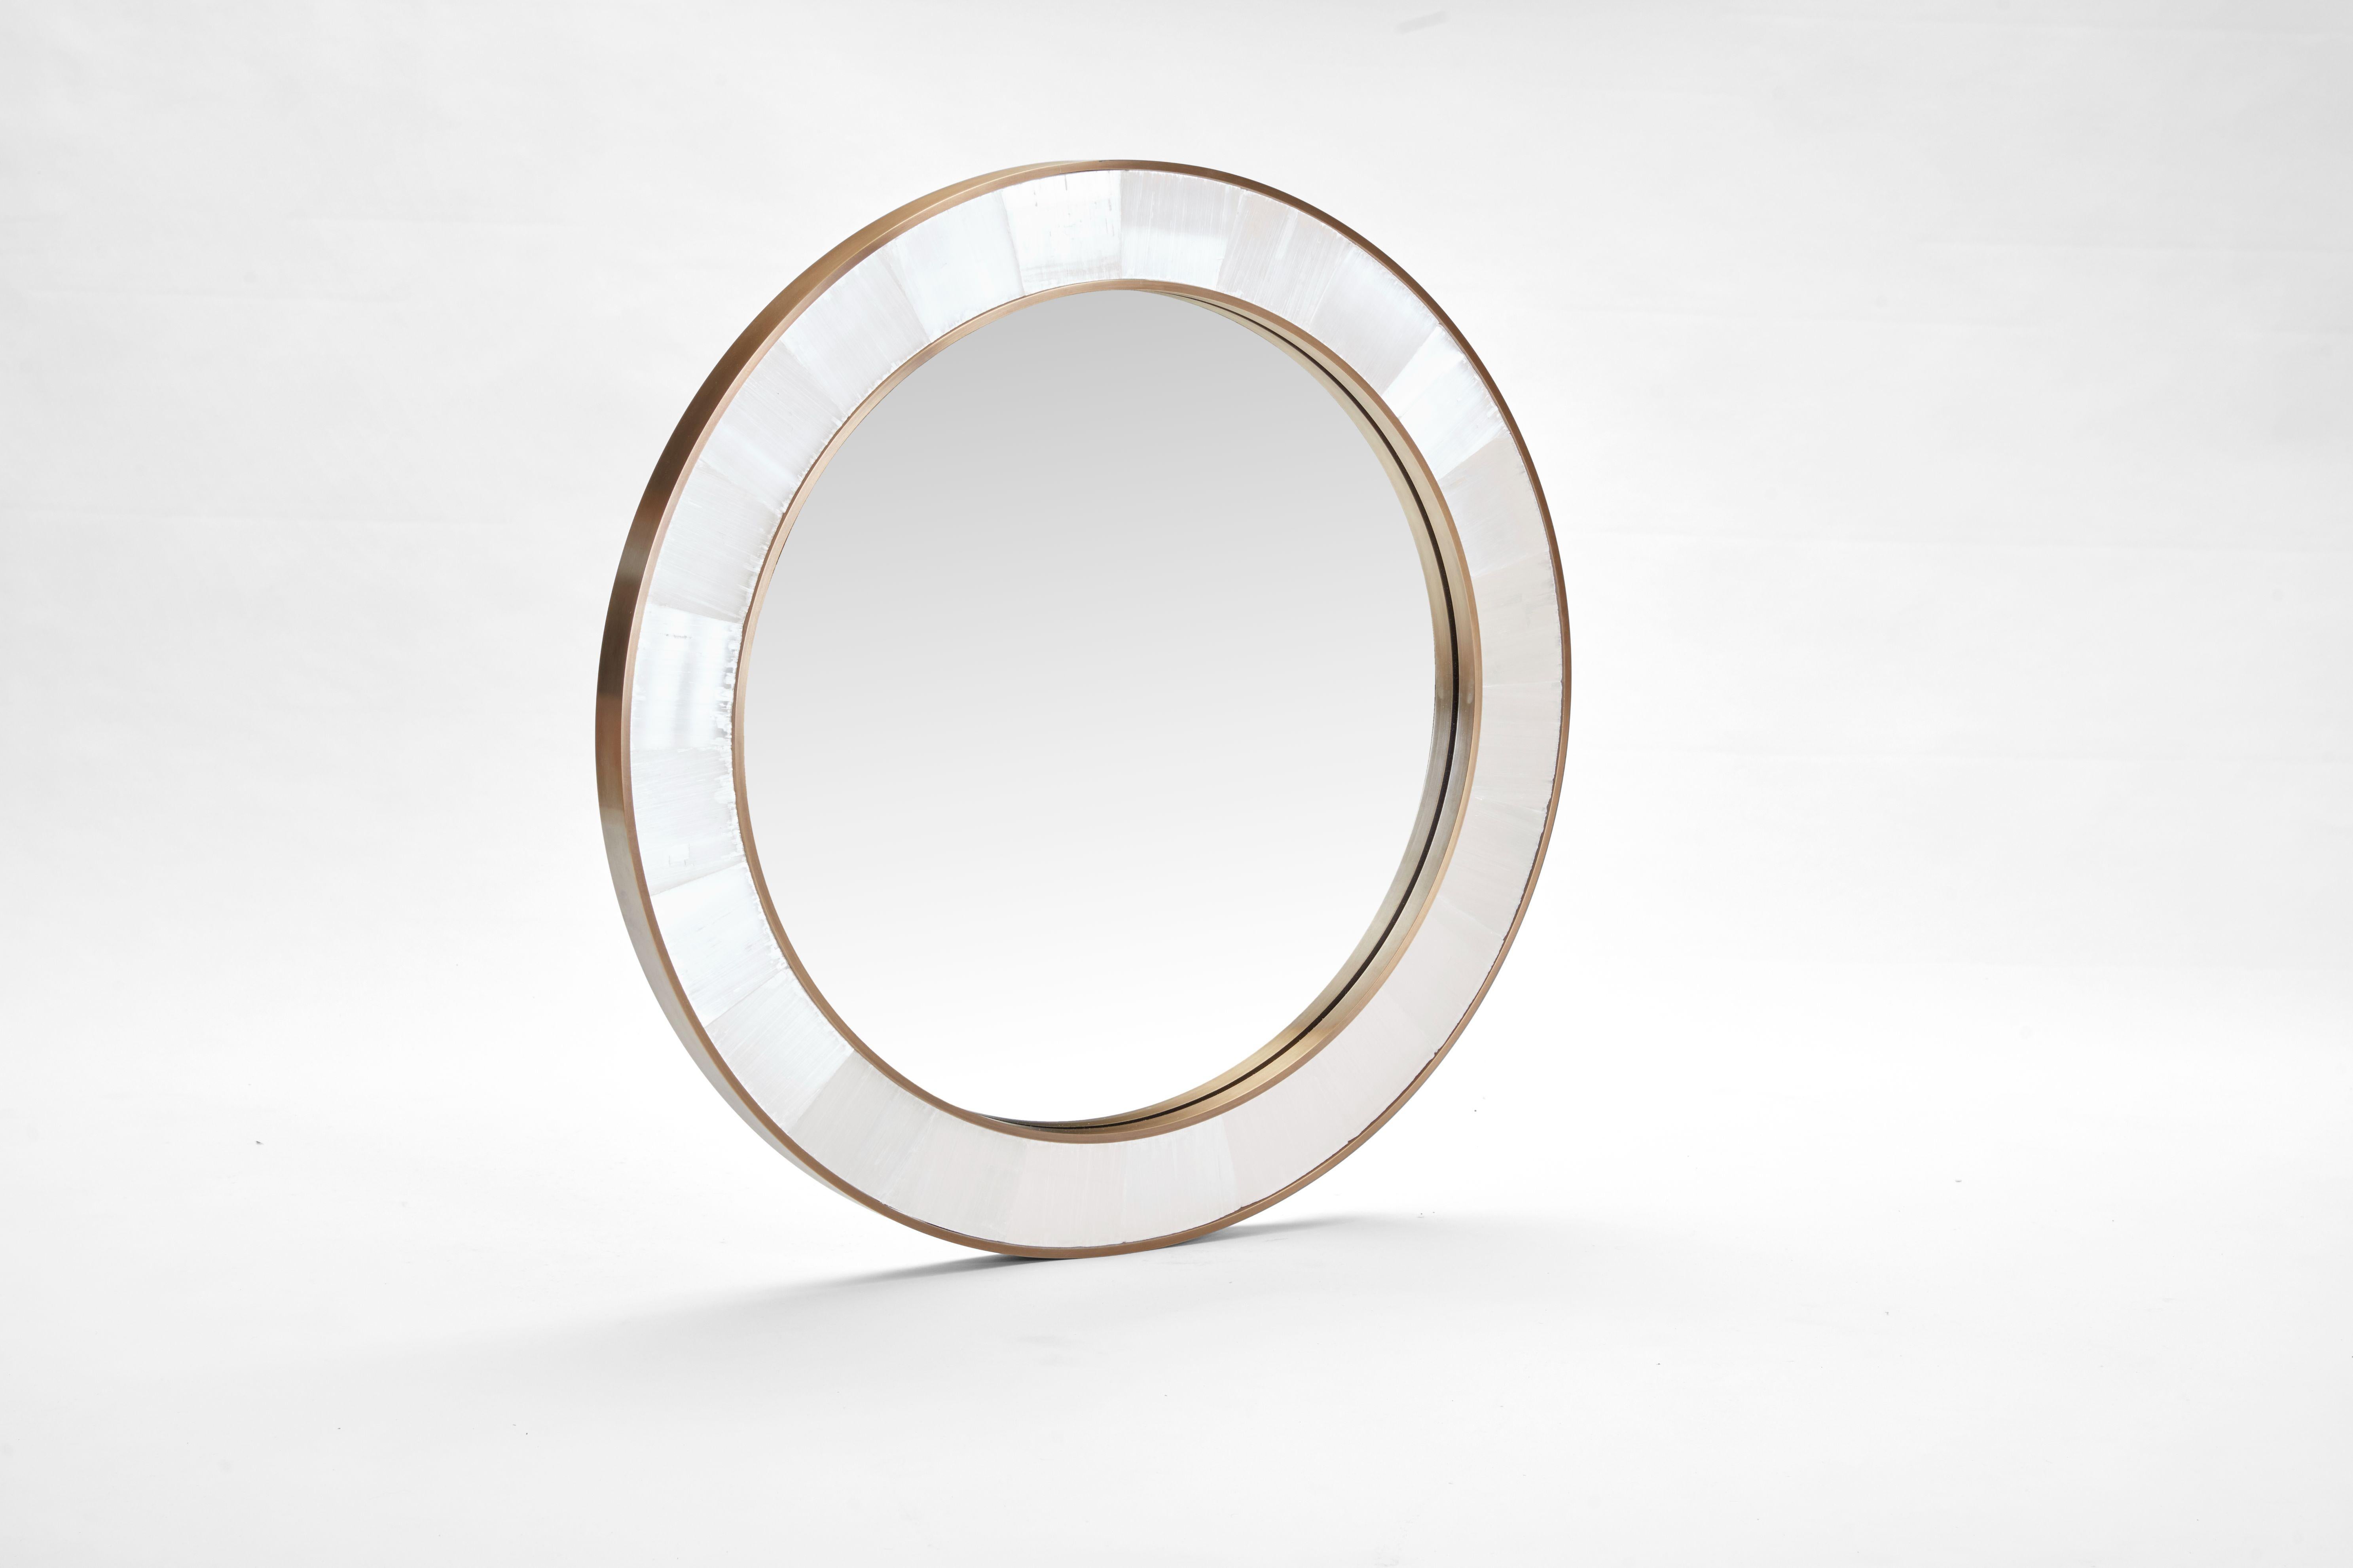 Circular Selenite and Brass Wall Mirror
Diameter 100 cm (39.37 inches) 
12 weeks lead time. 

Selenite is said to be a powerful healing crystal that promotes peace and calm, mental clarity, and well-being. It's also believed by some that this